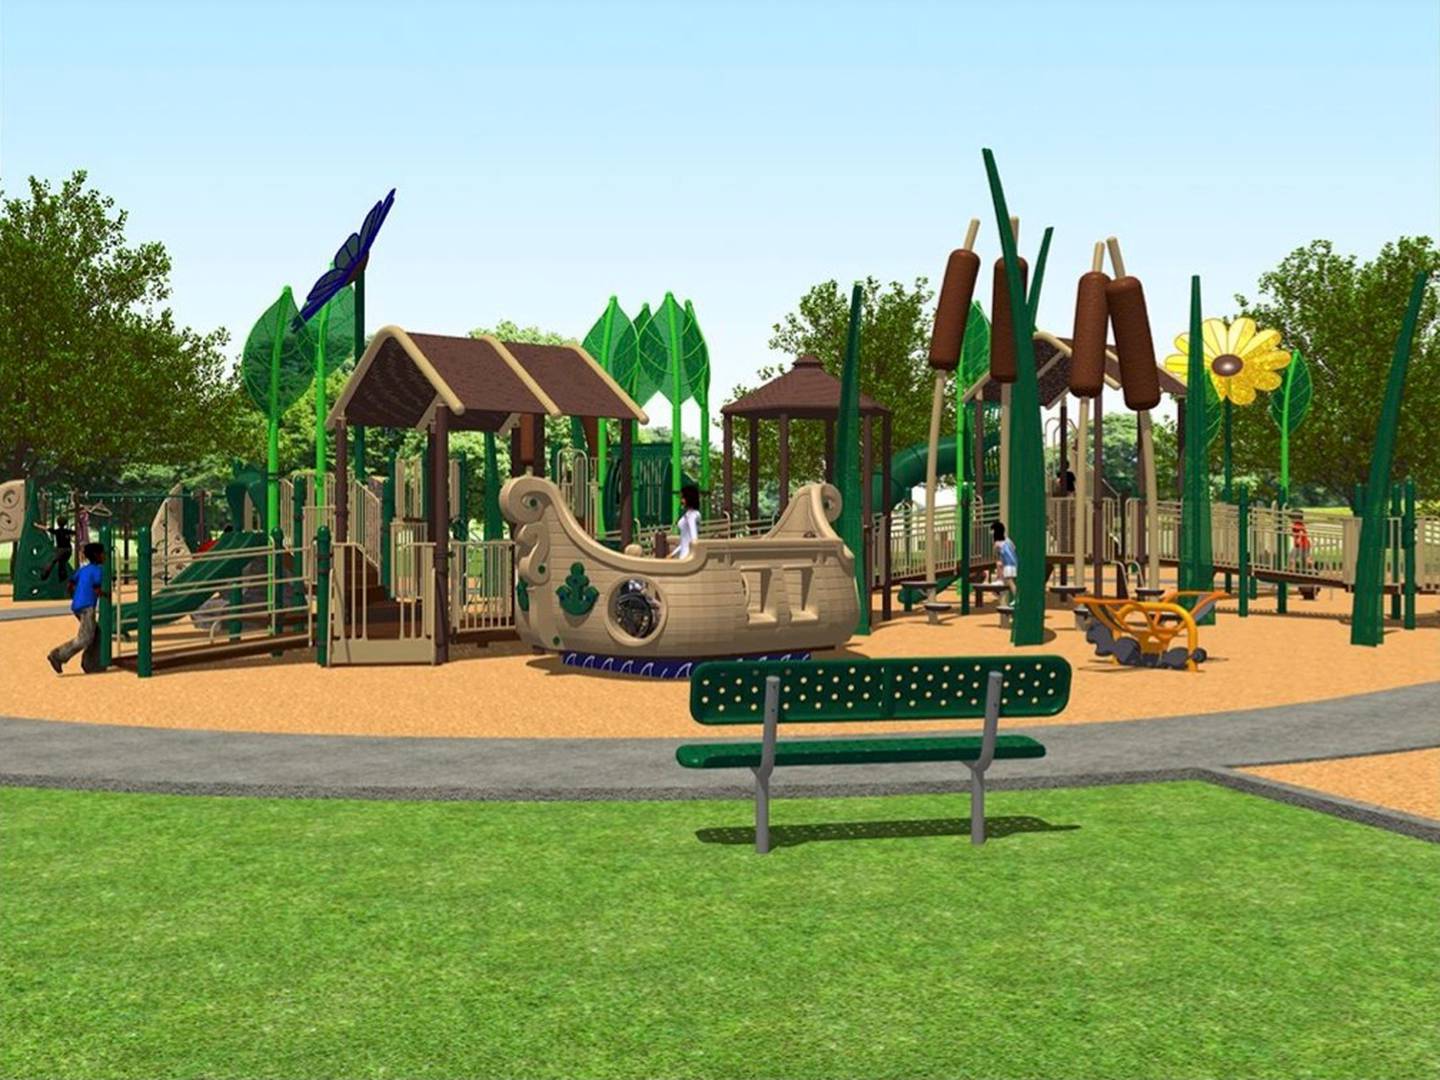 Renderings of creative thematic structures that could be part of a new inclusive playground the city hopes to build in 2023 at Emricson Park in Woodstock.